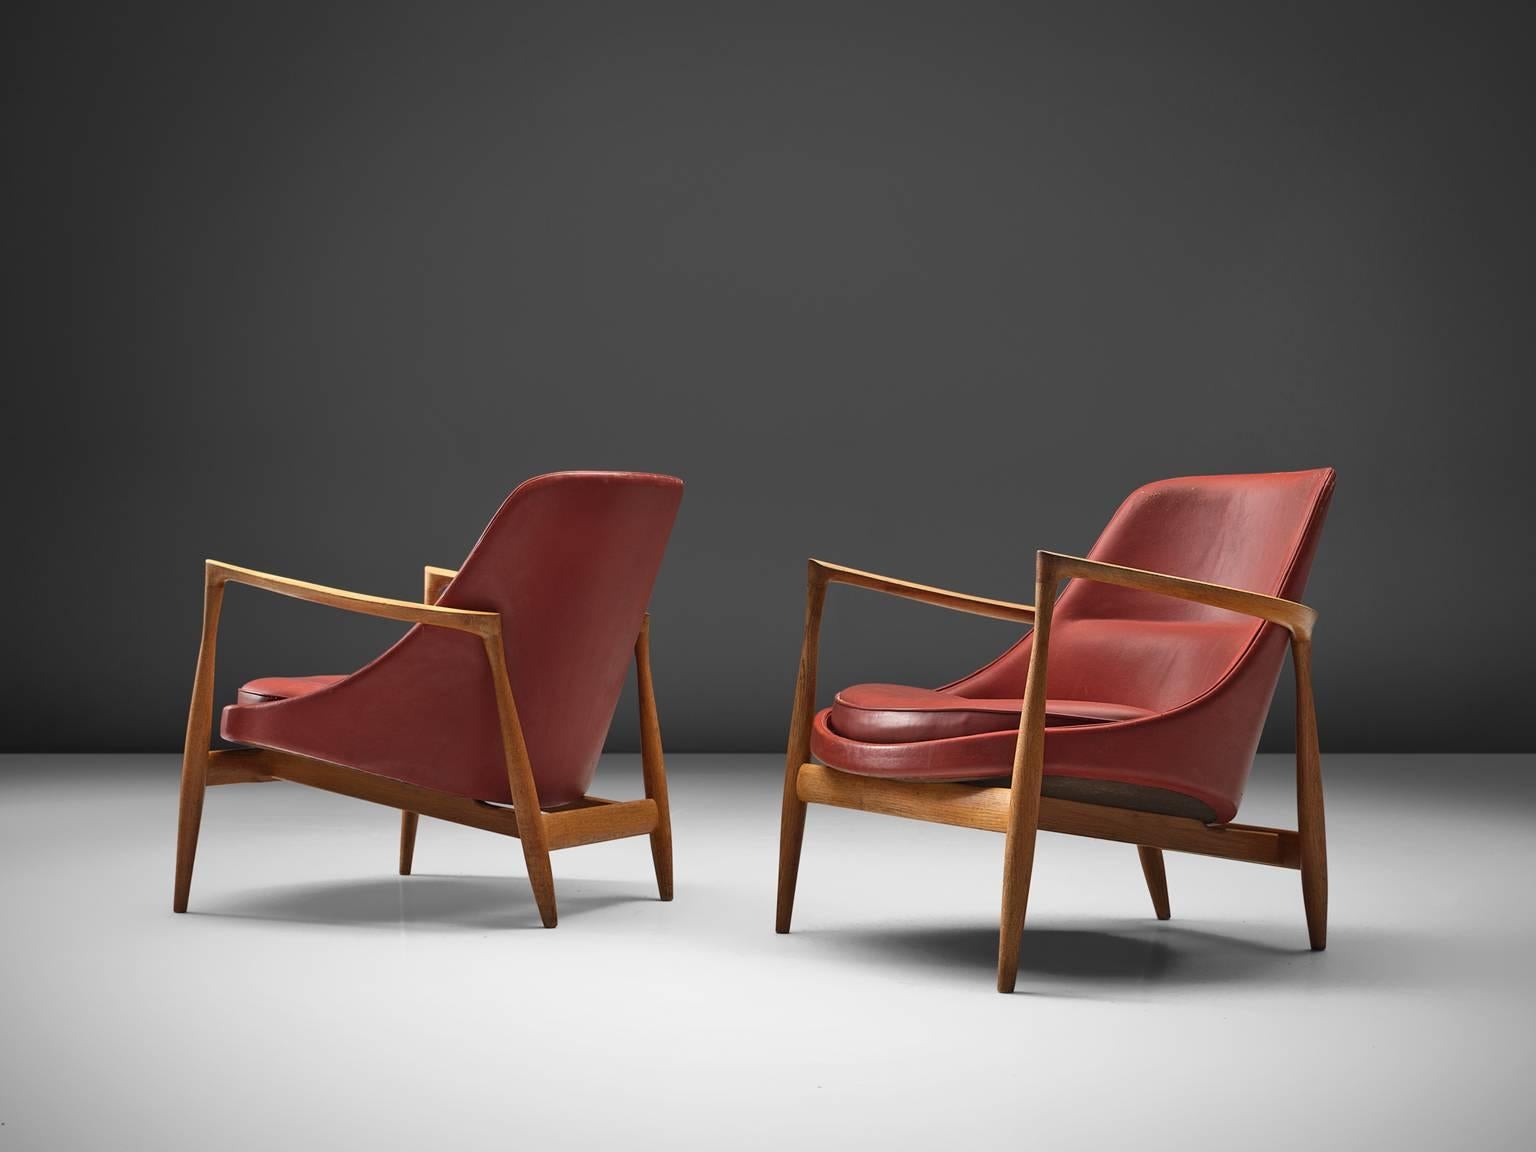 Ib Kofod-Larsen, two lounge chairs, model U-56 'Elizabeth', oak and red leather, Denmark, 1956. 

These are two of Kofod-Larsen highest-quality armchairs, with an oak frame and beautiful details in the design. The leather holds the original leather.